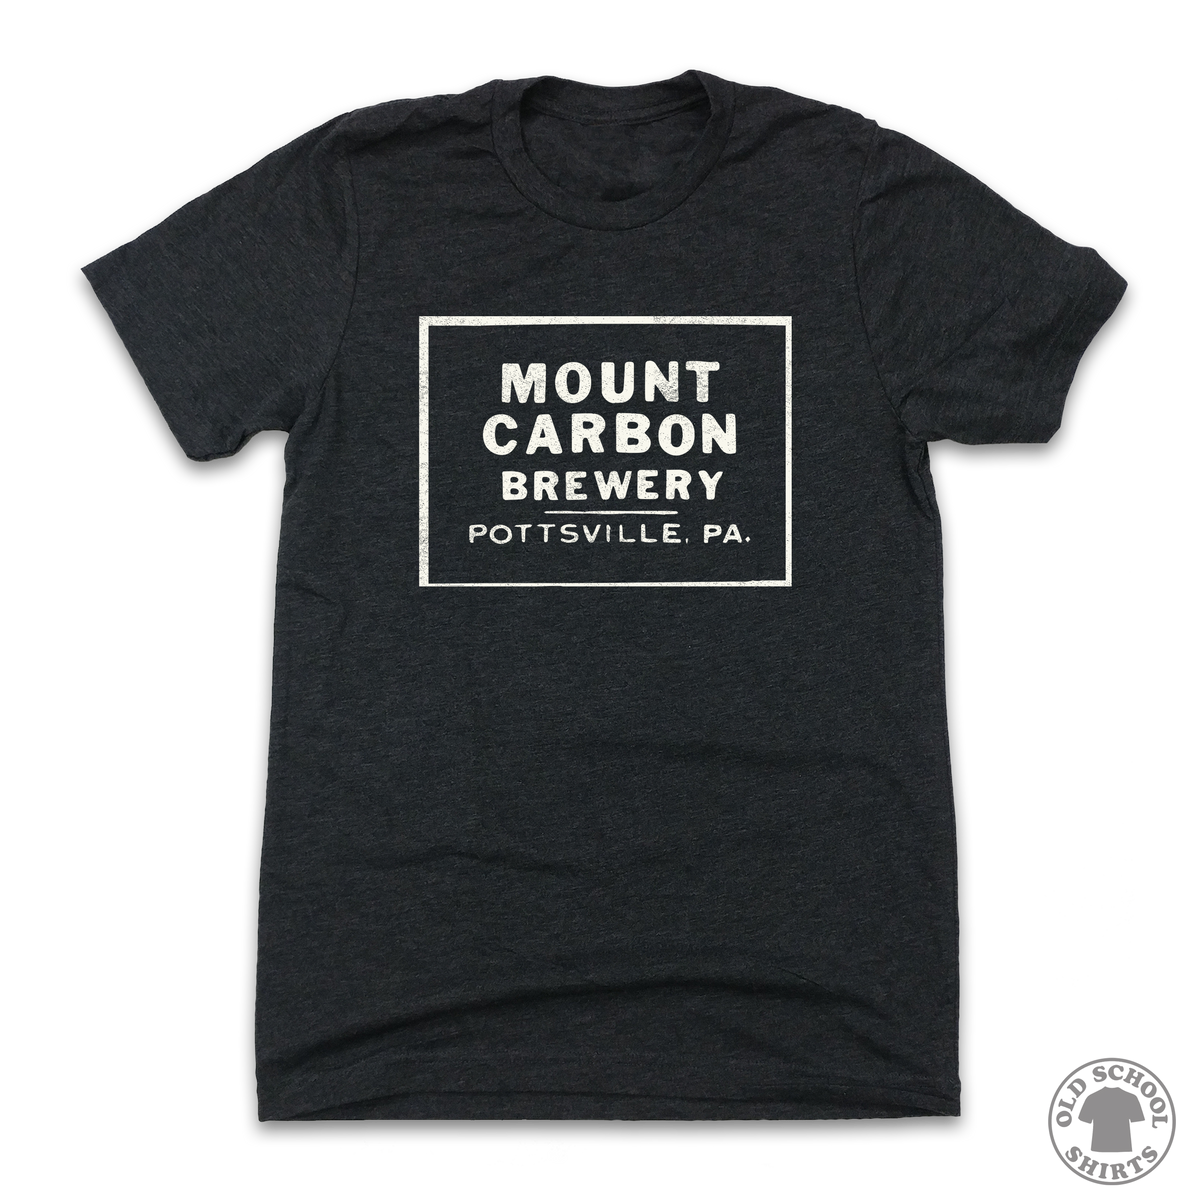 Mount Carbon Brewery - Old School Shirts- Retro Sports T Shirts